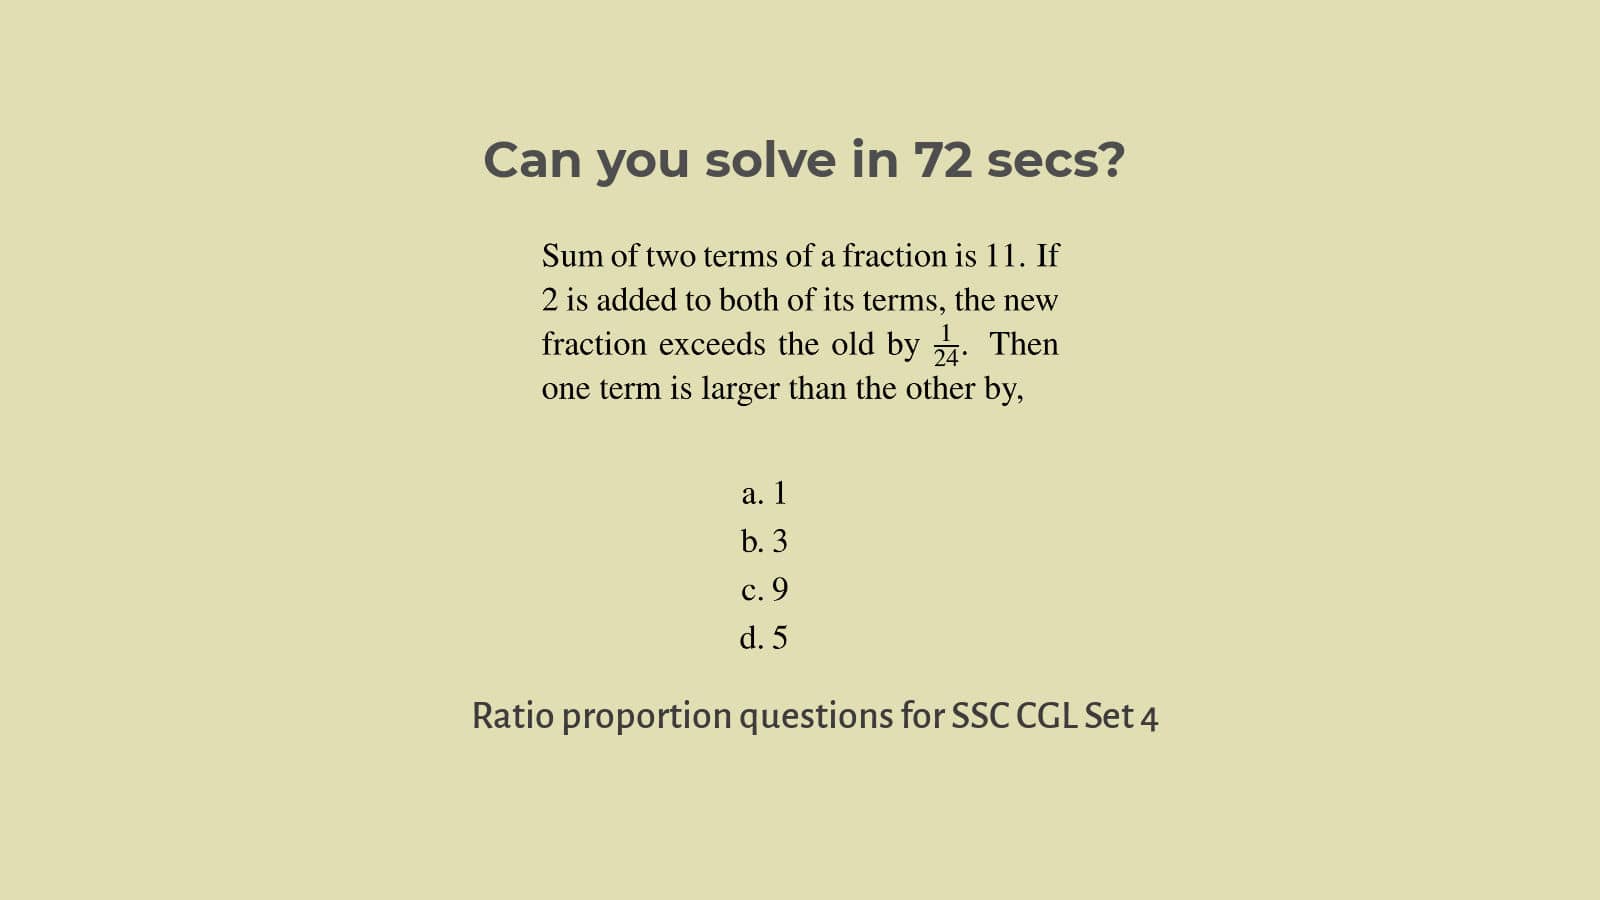 Ratio proportion questions for SSC CGL Set 4